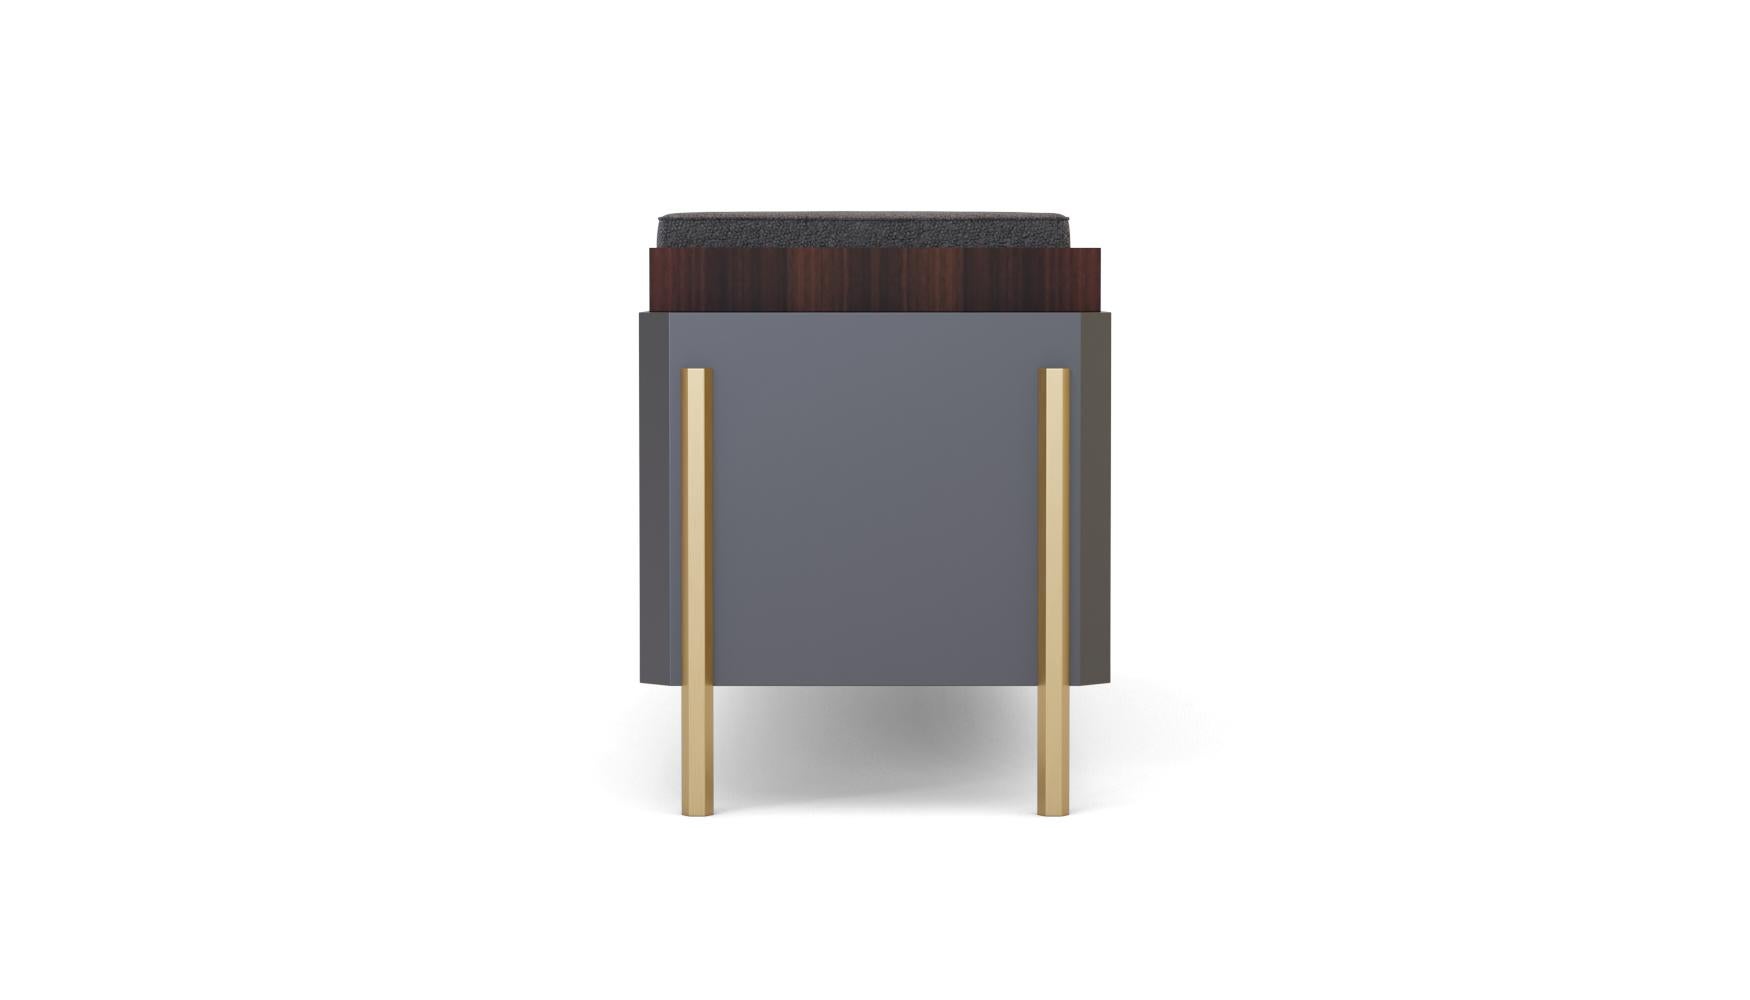 The sideboard is sartorially constructed from a sturdy wooden frame. It has a big push&pull drawer with 25 mirror strips applied. It shows also solid hexagonal legs and a triangular insert on the door in warm satin-finish brass.
The design is